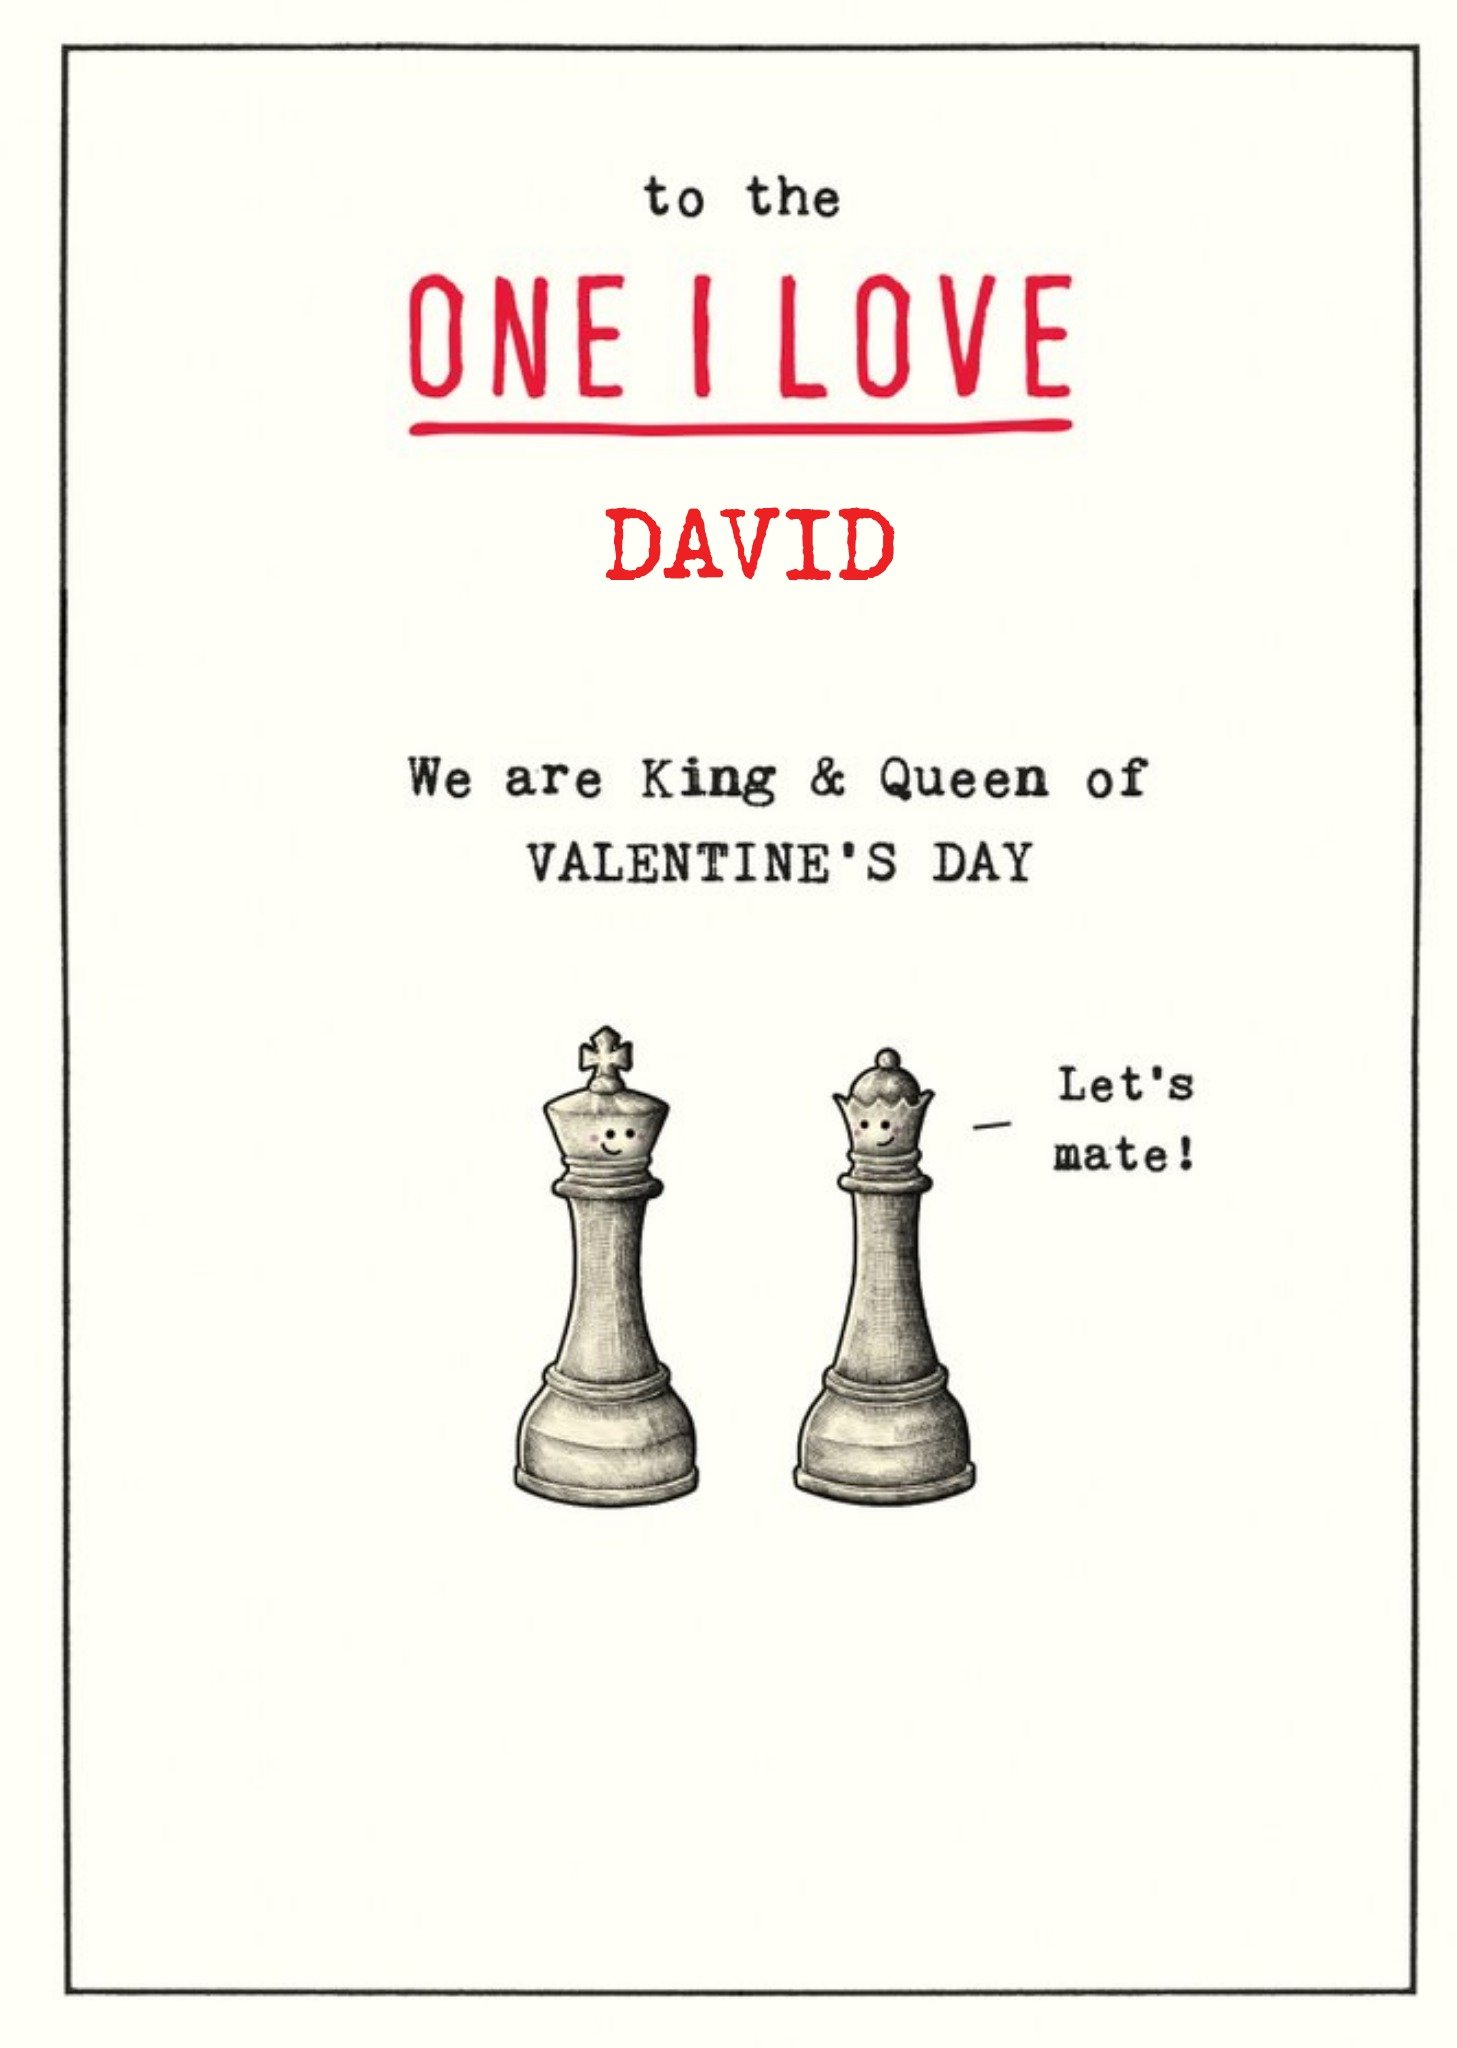 Moonpig Illustration Of King And Queen Chess Pieces Cheeky Pun Valentine's Day Card, Large